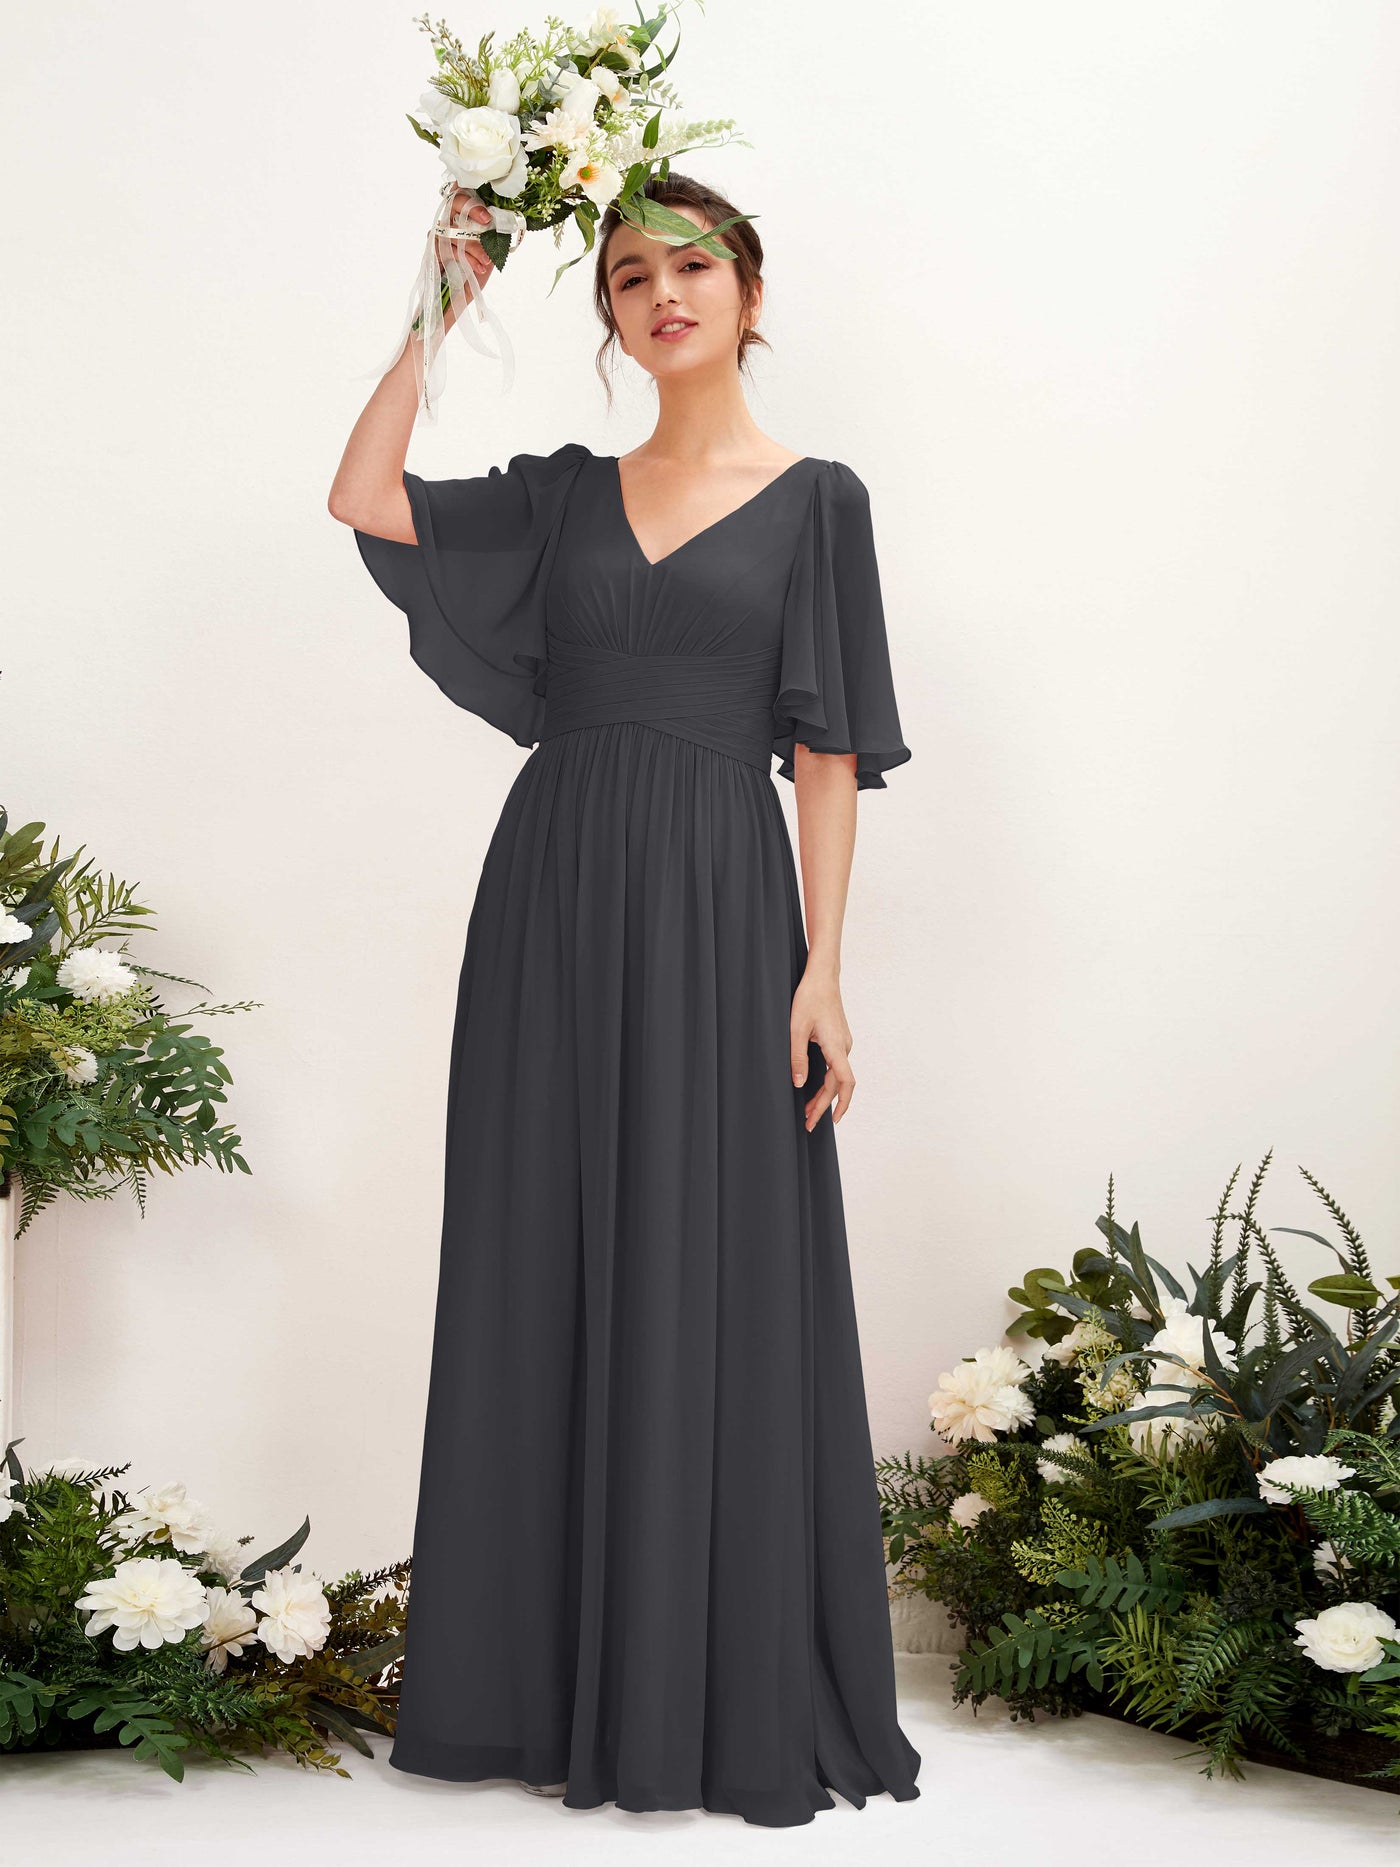 Pewter Bridesmaid Dresses Bridesmaid Dress A-line Chiffon V-neck Full Length 1/2 Sleeves Wedding Party Dress (81221638)#color_pewter